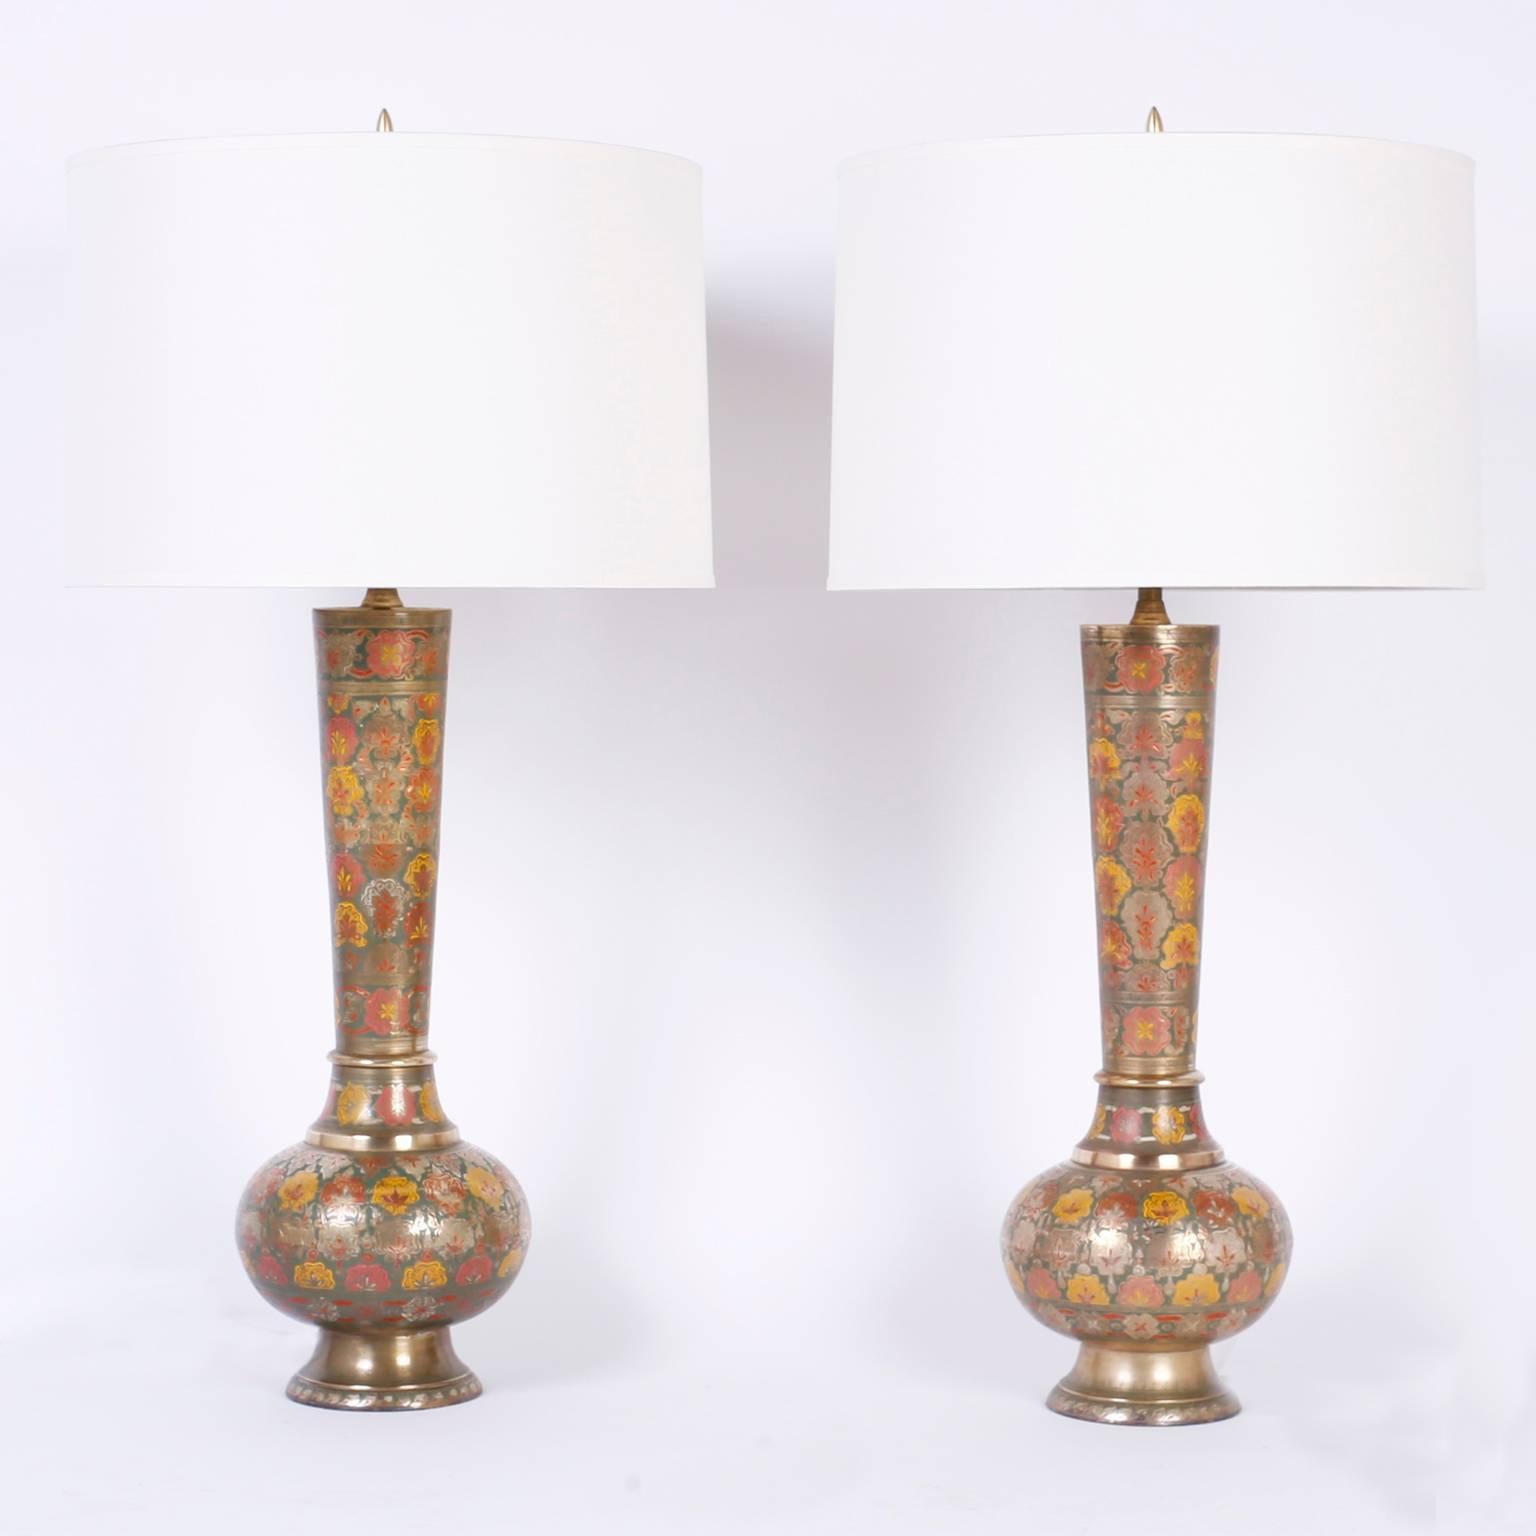 Pair of table lamps crafted with spun and engraved brass in a vogue, modern style and decorated with floral enamel designs. On the Kashmiri style. Newly wired.